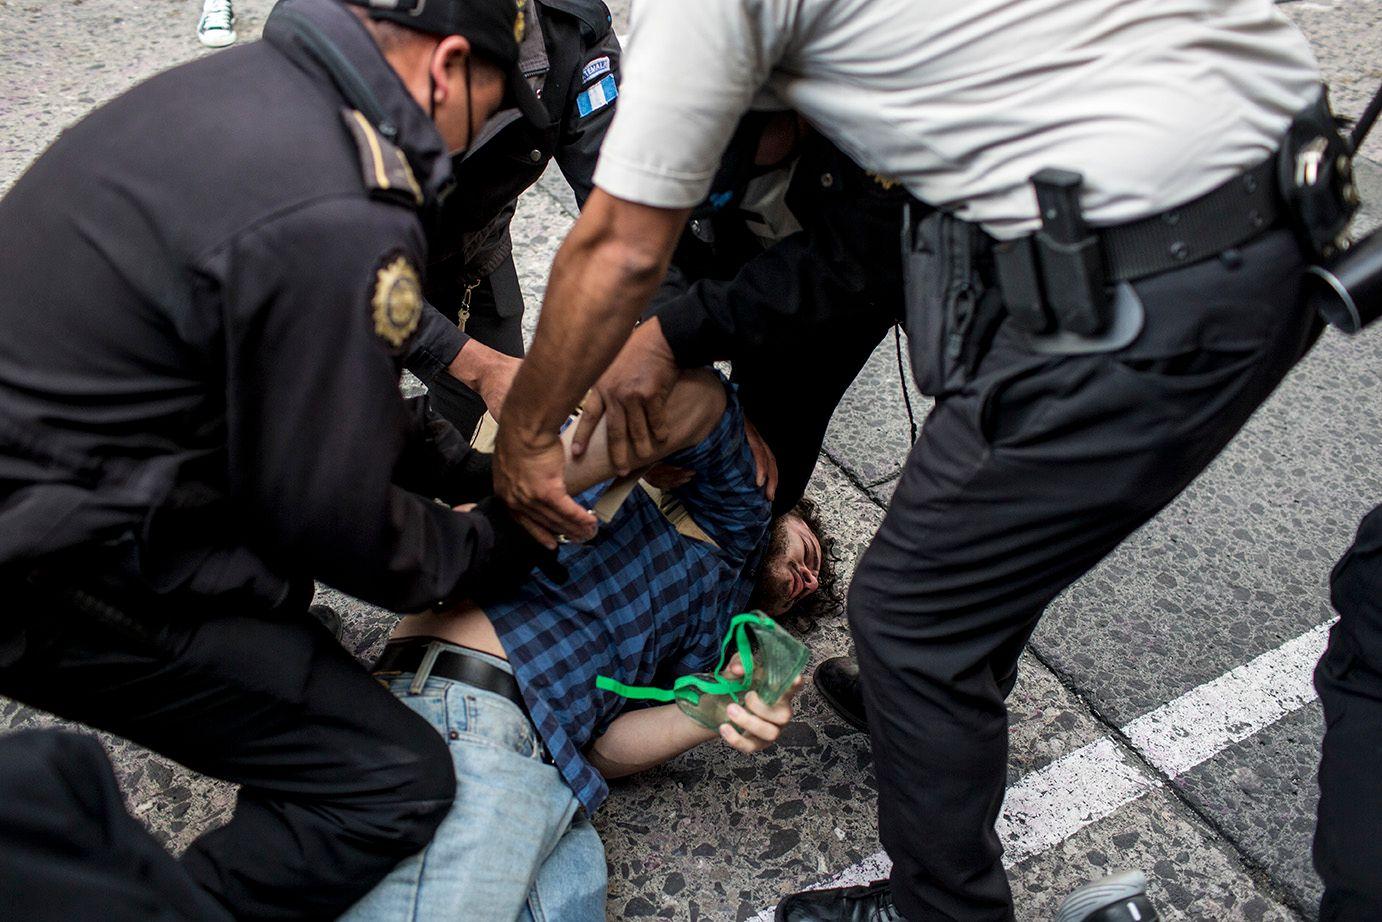 A protester is pinned to the ground by members of the Police. /